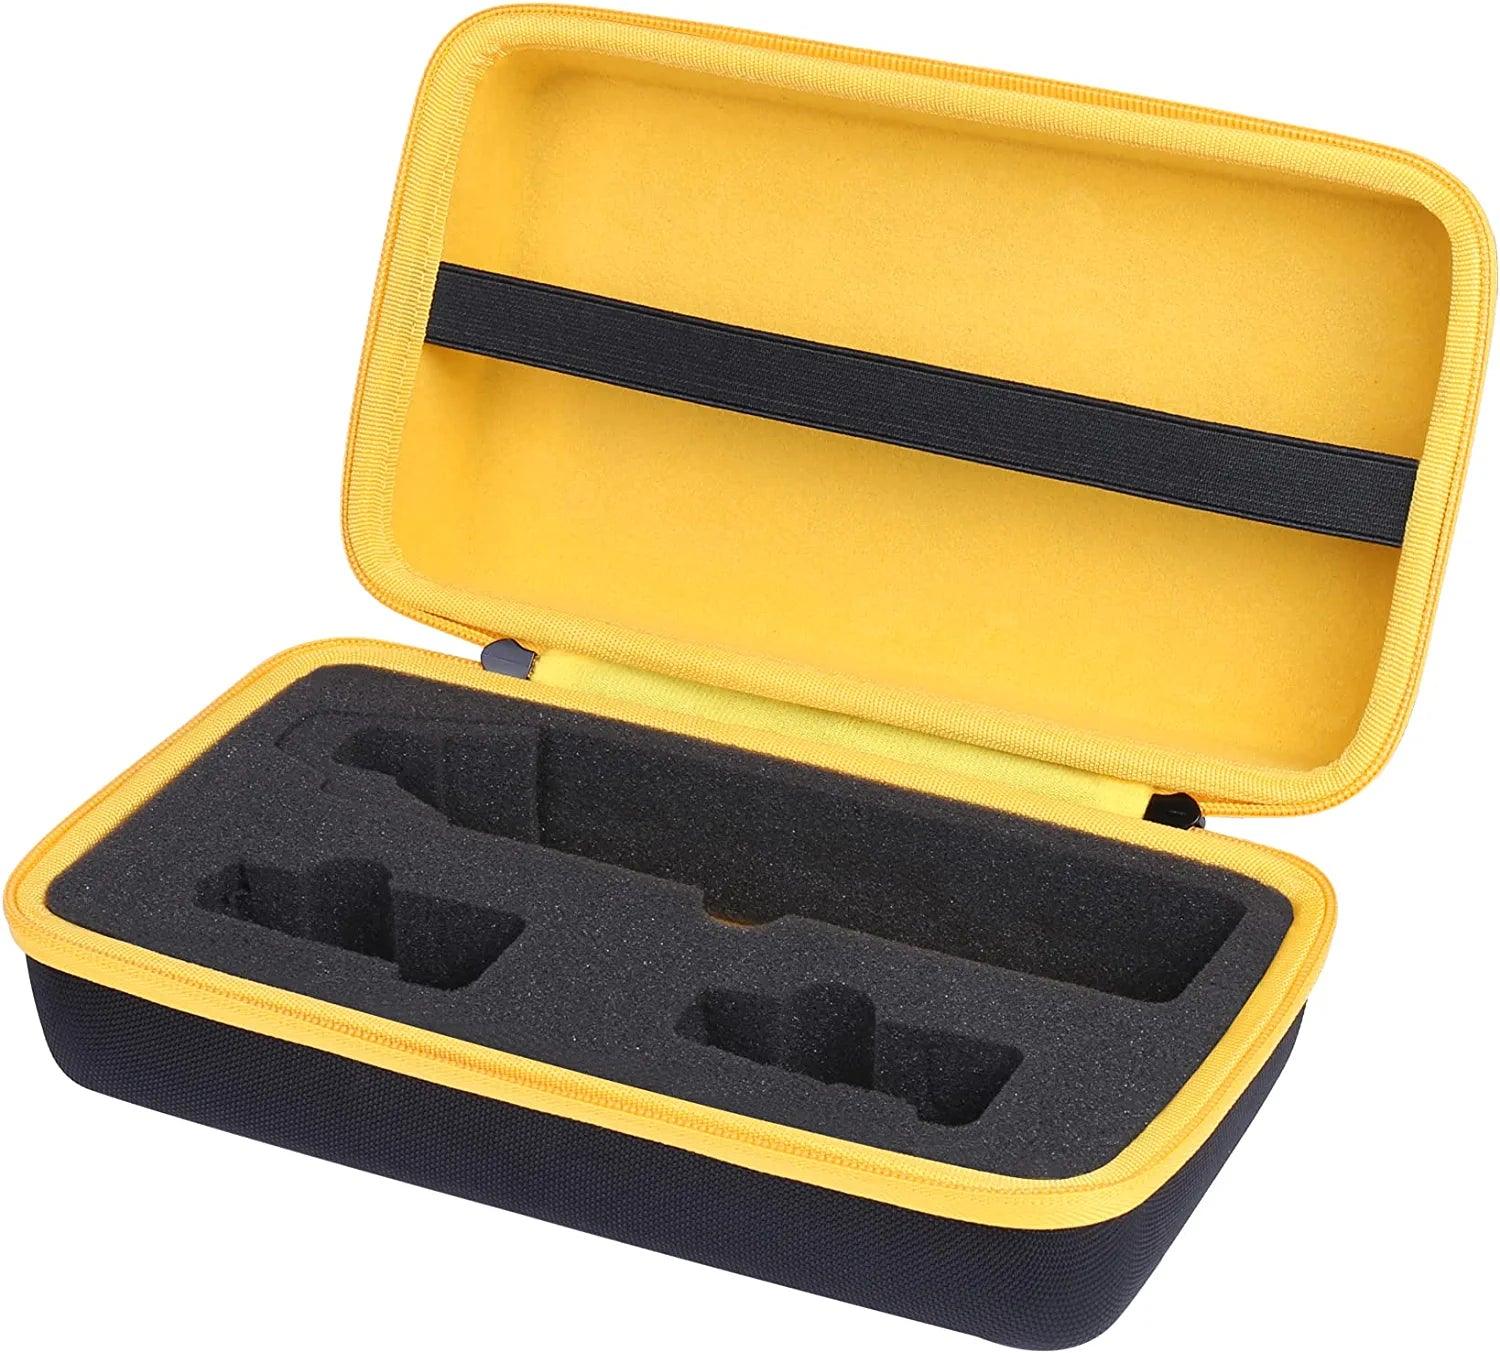 Hard Carrying Case Replacement for DEWALT DCF682N1 / DCF680N2 8V MAX Cordless Screwdriver Kit, Gyroscopic